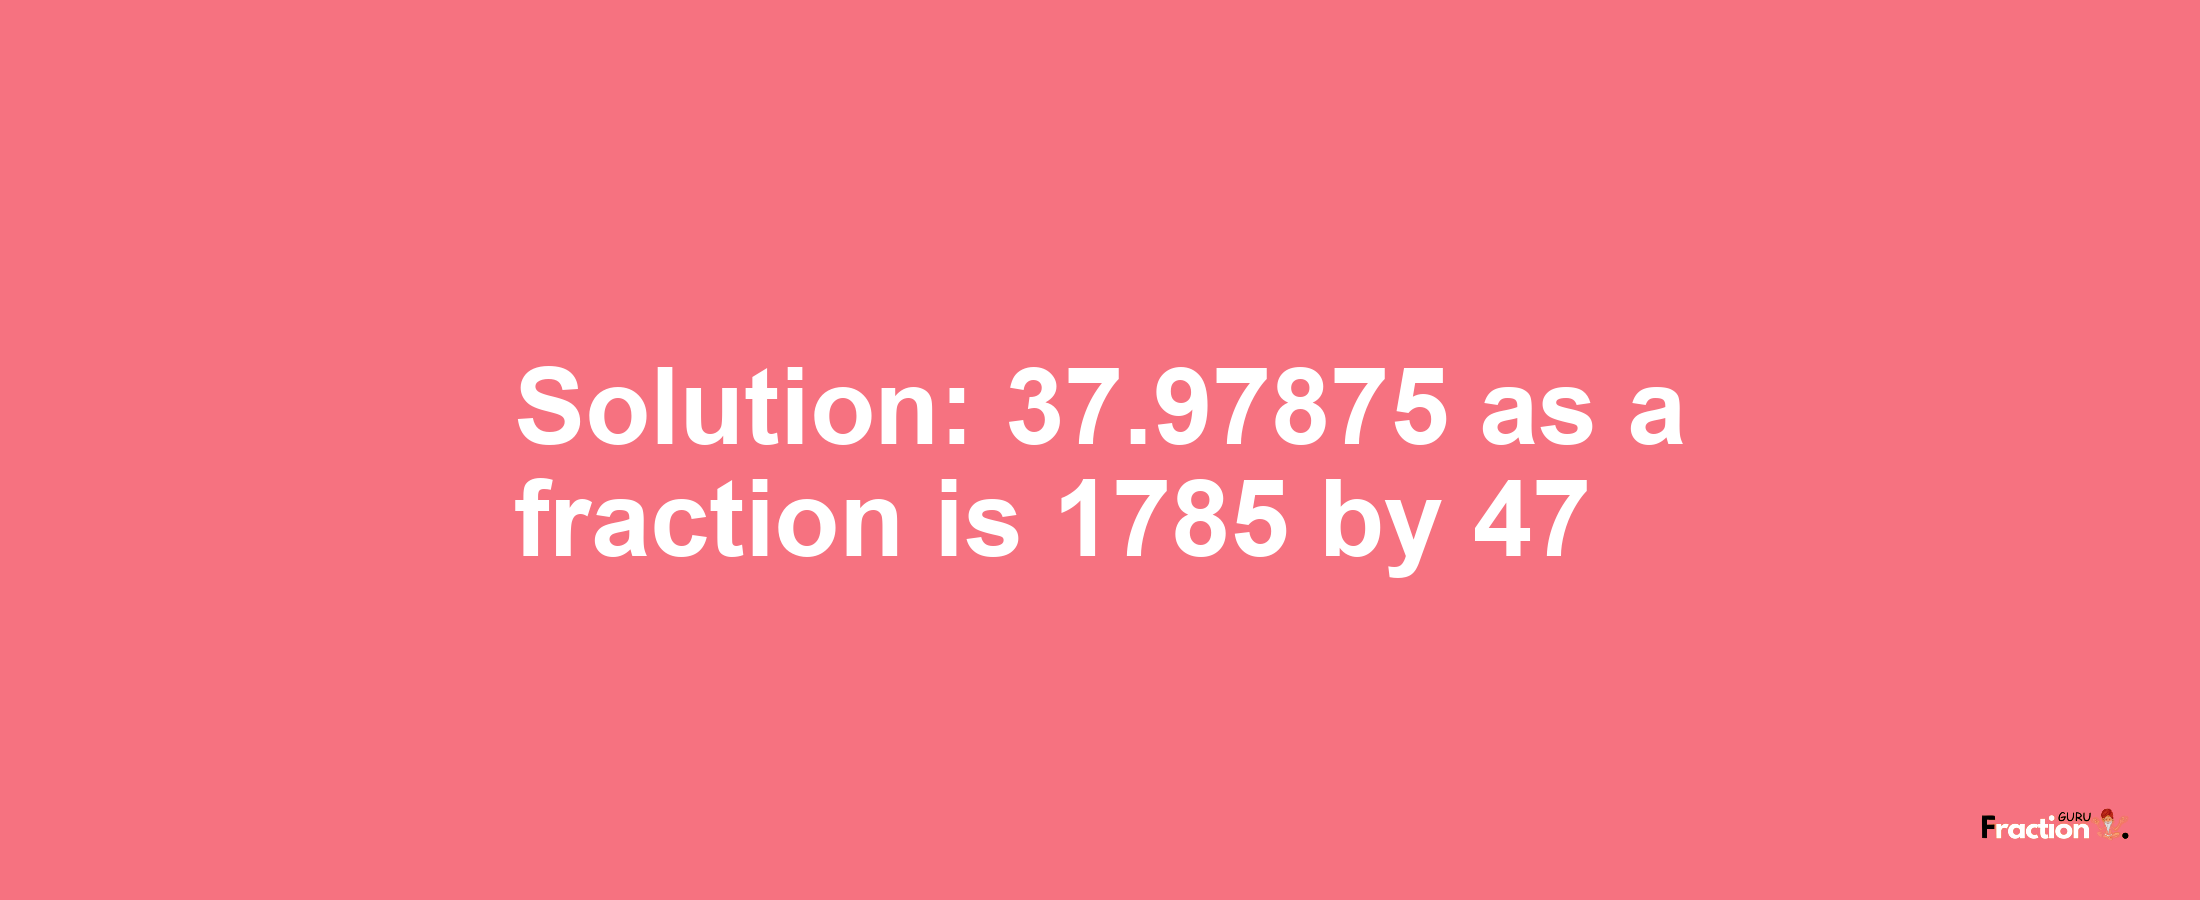 Solution:37.97875 as a fraction is 1785/47